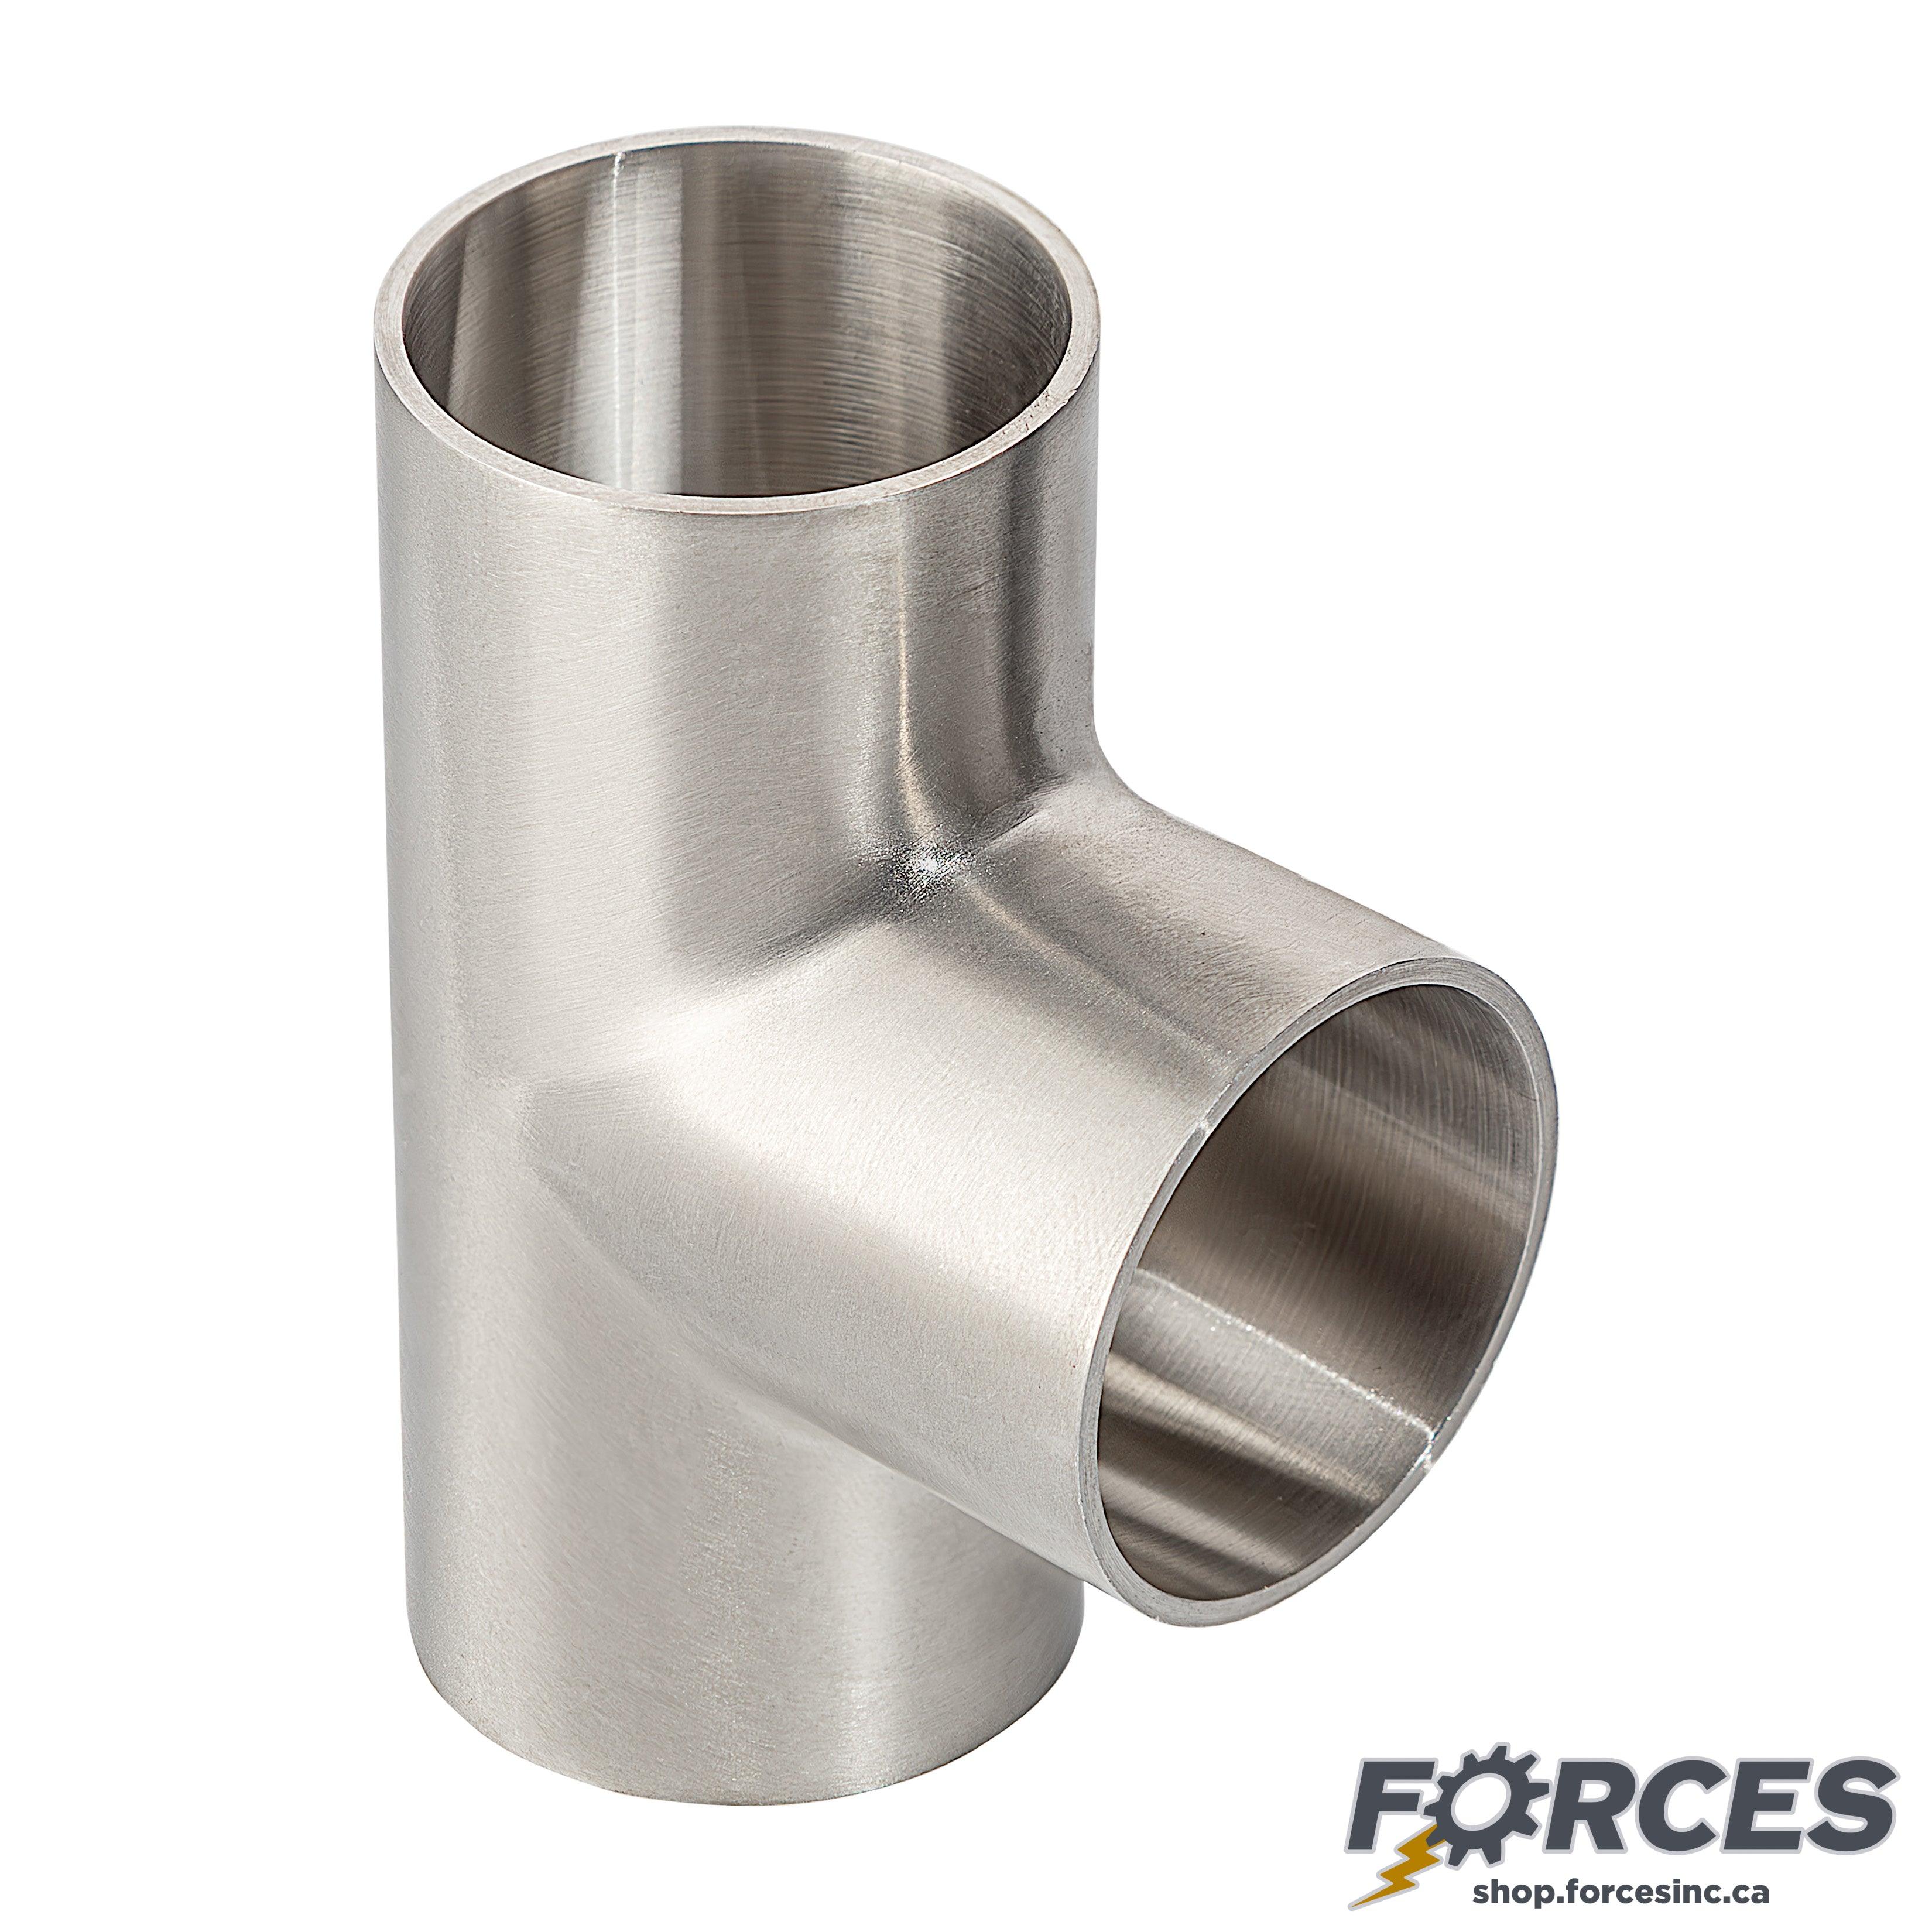 2" Butt Weld Short Tee - Stainless Steel 316 - Forces Inc